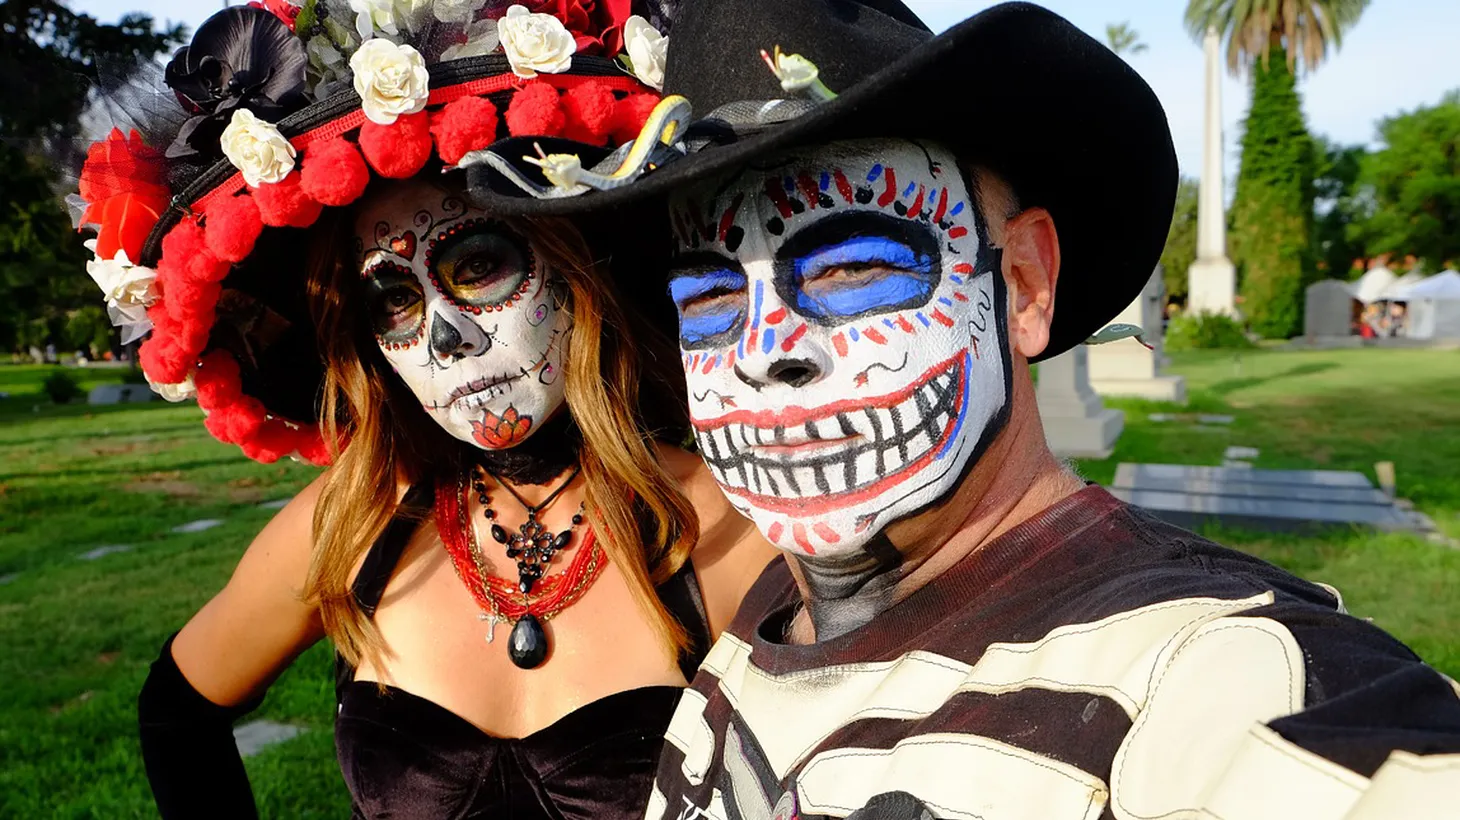 Revelers wear sugar skull makeup for a Day of the Dead celebration at Hollywood Forever Cemetery.